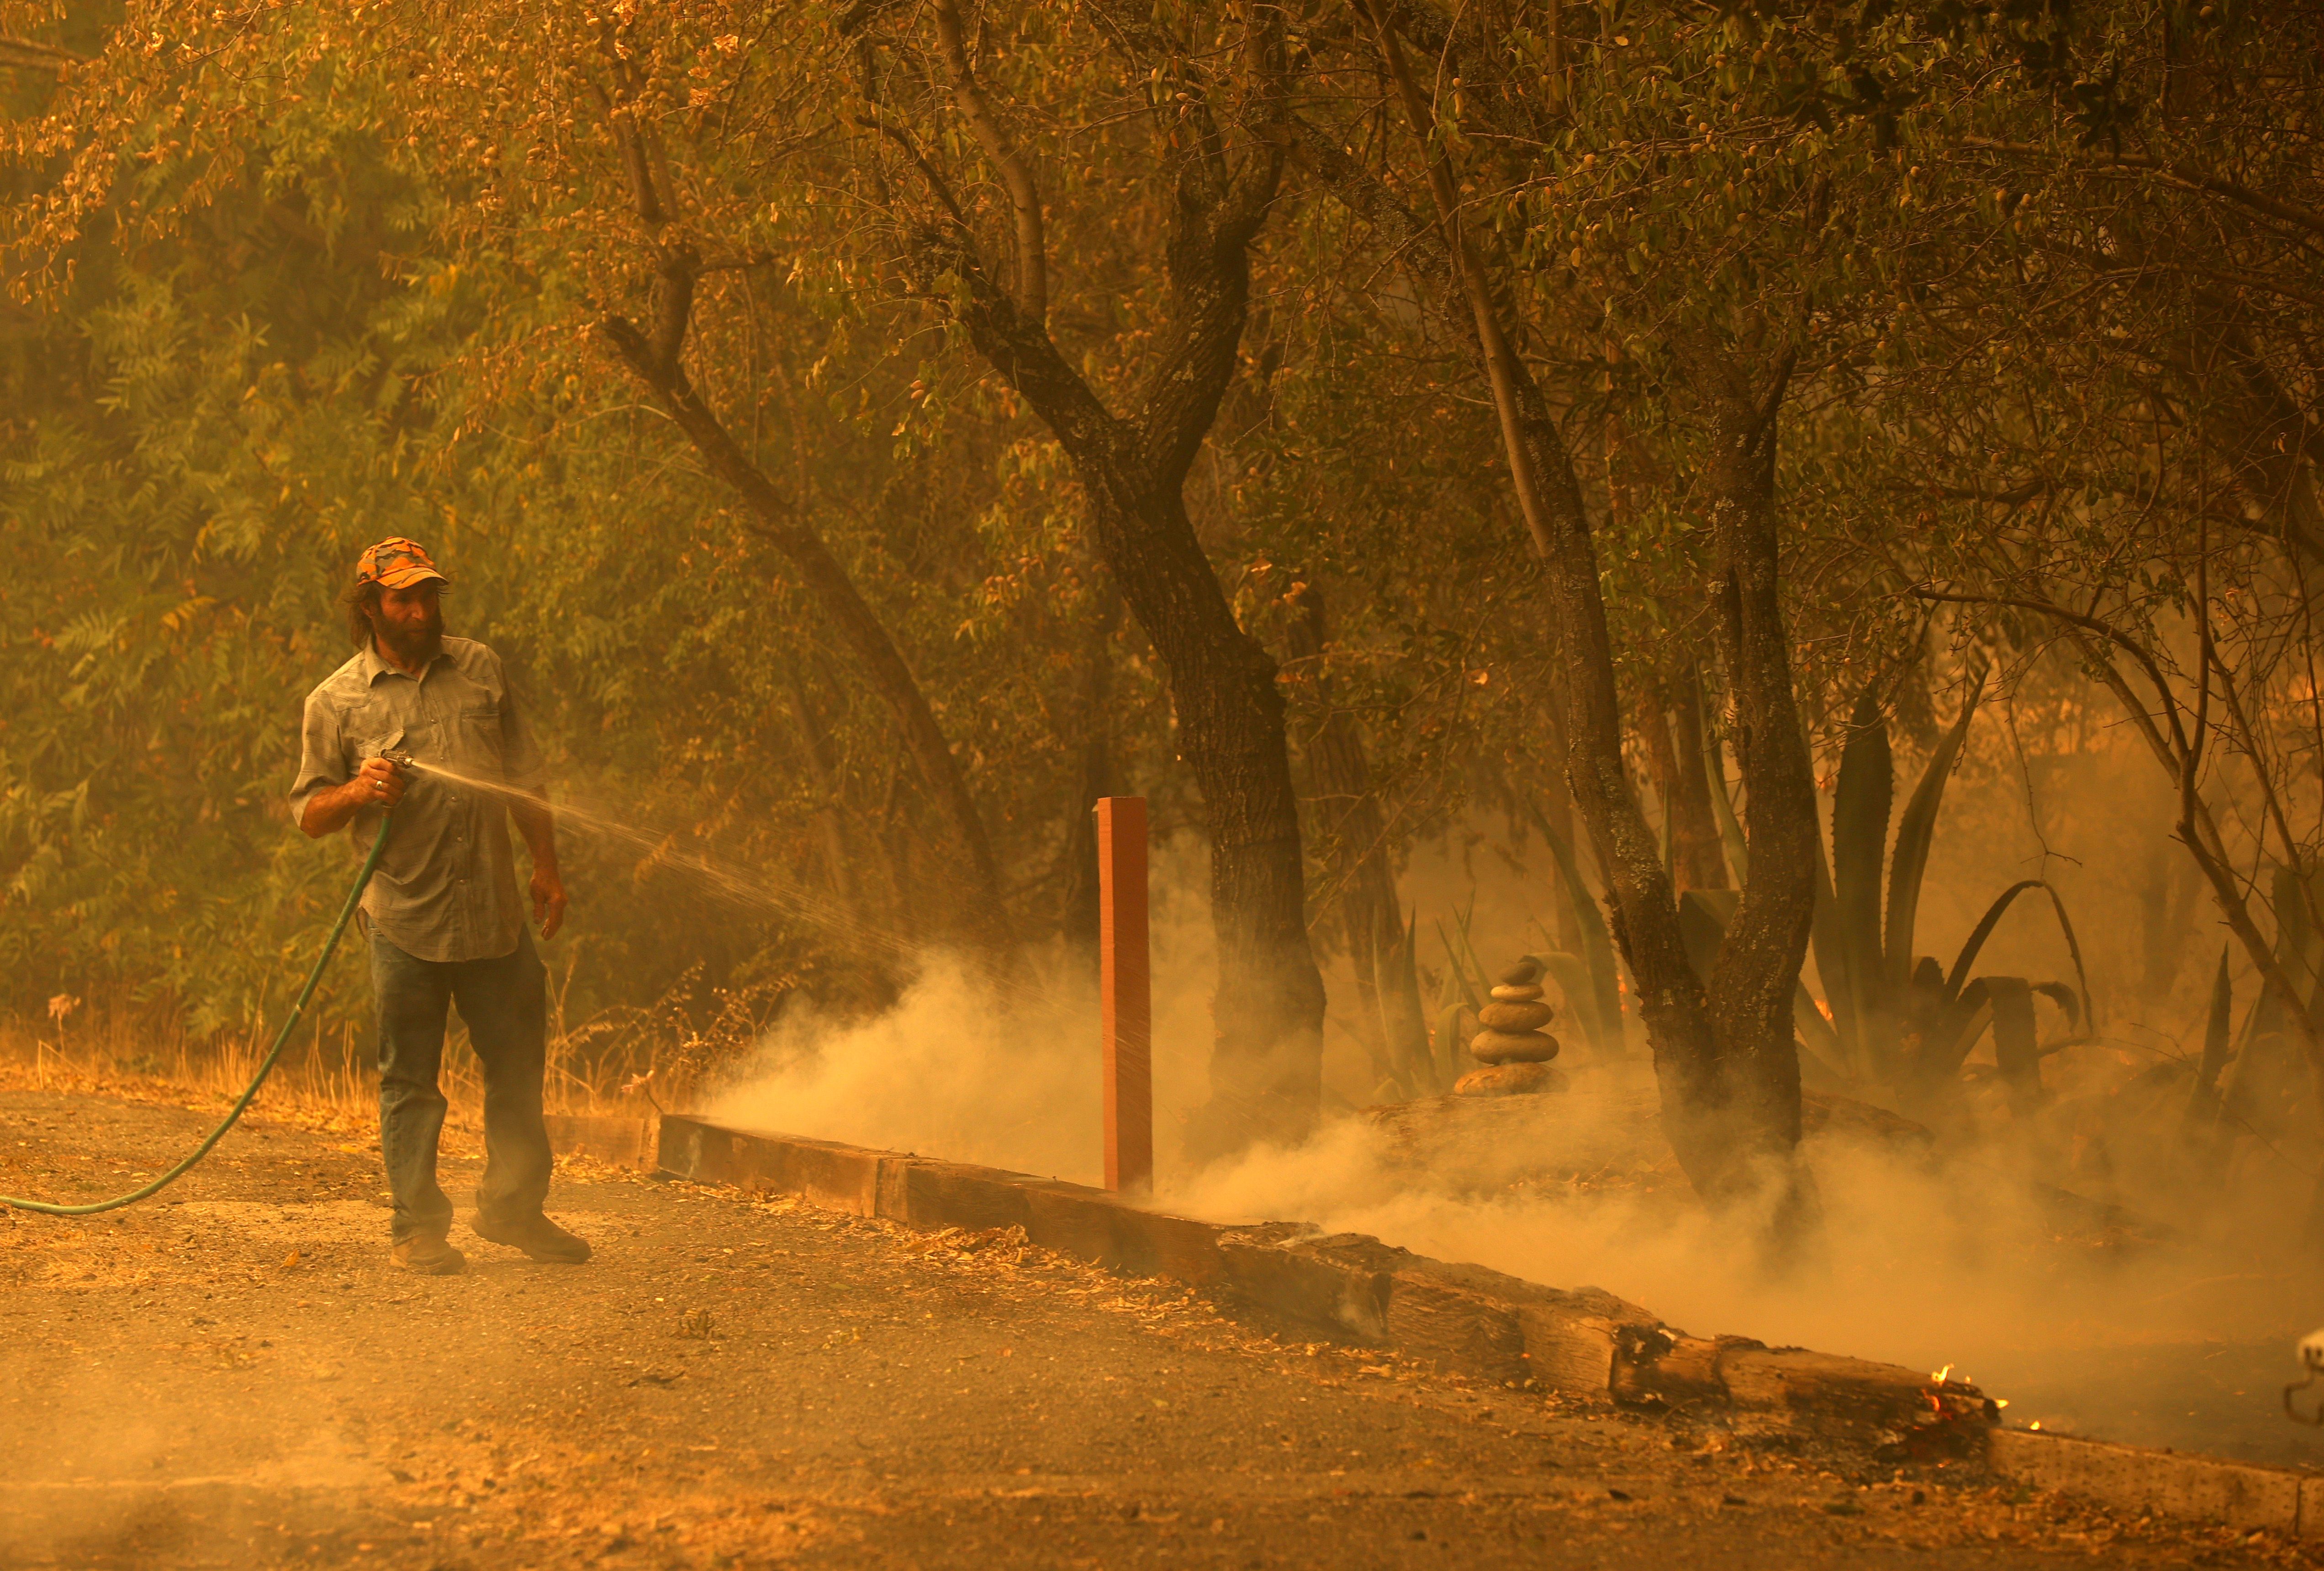 A resident uses a garden hose as he extinguishes spot fires while protecting his property as the LNU Lightning Complex fire burns through the area on August 19